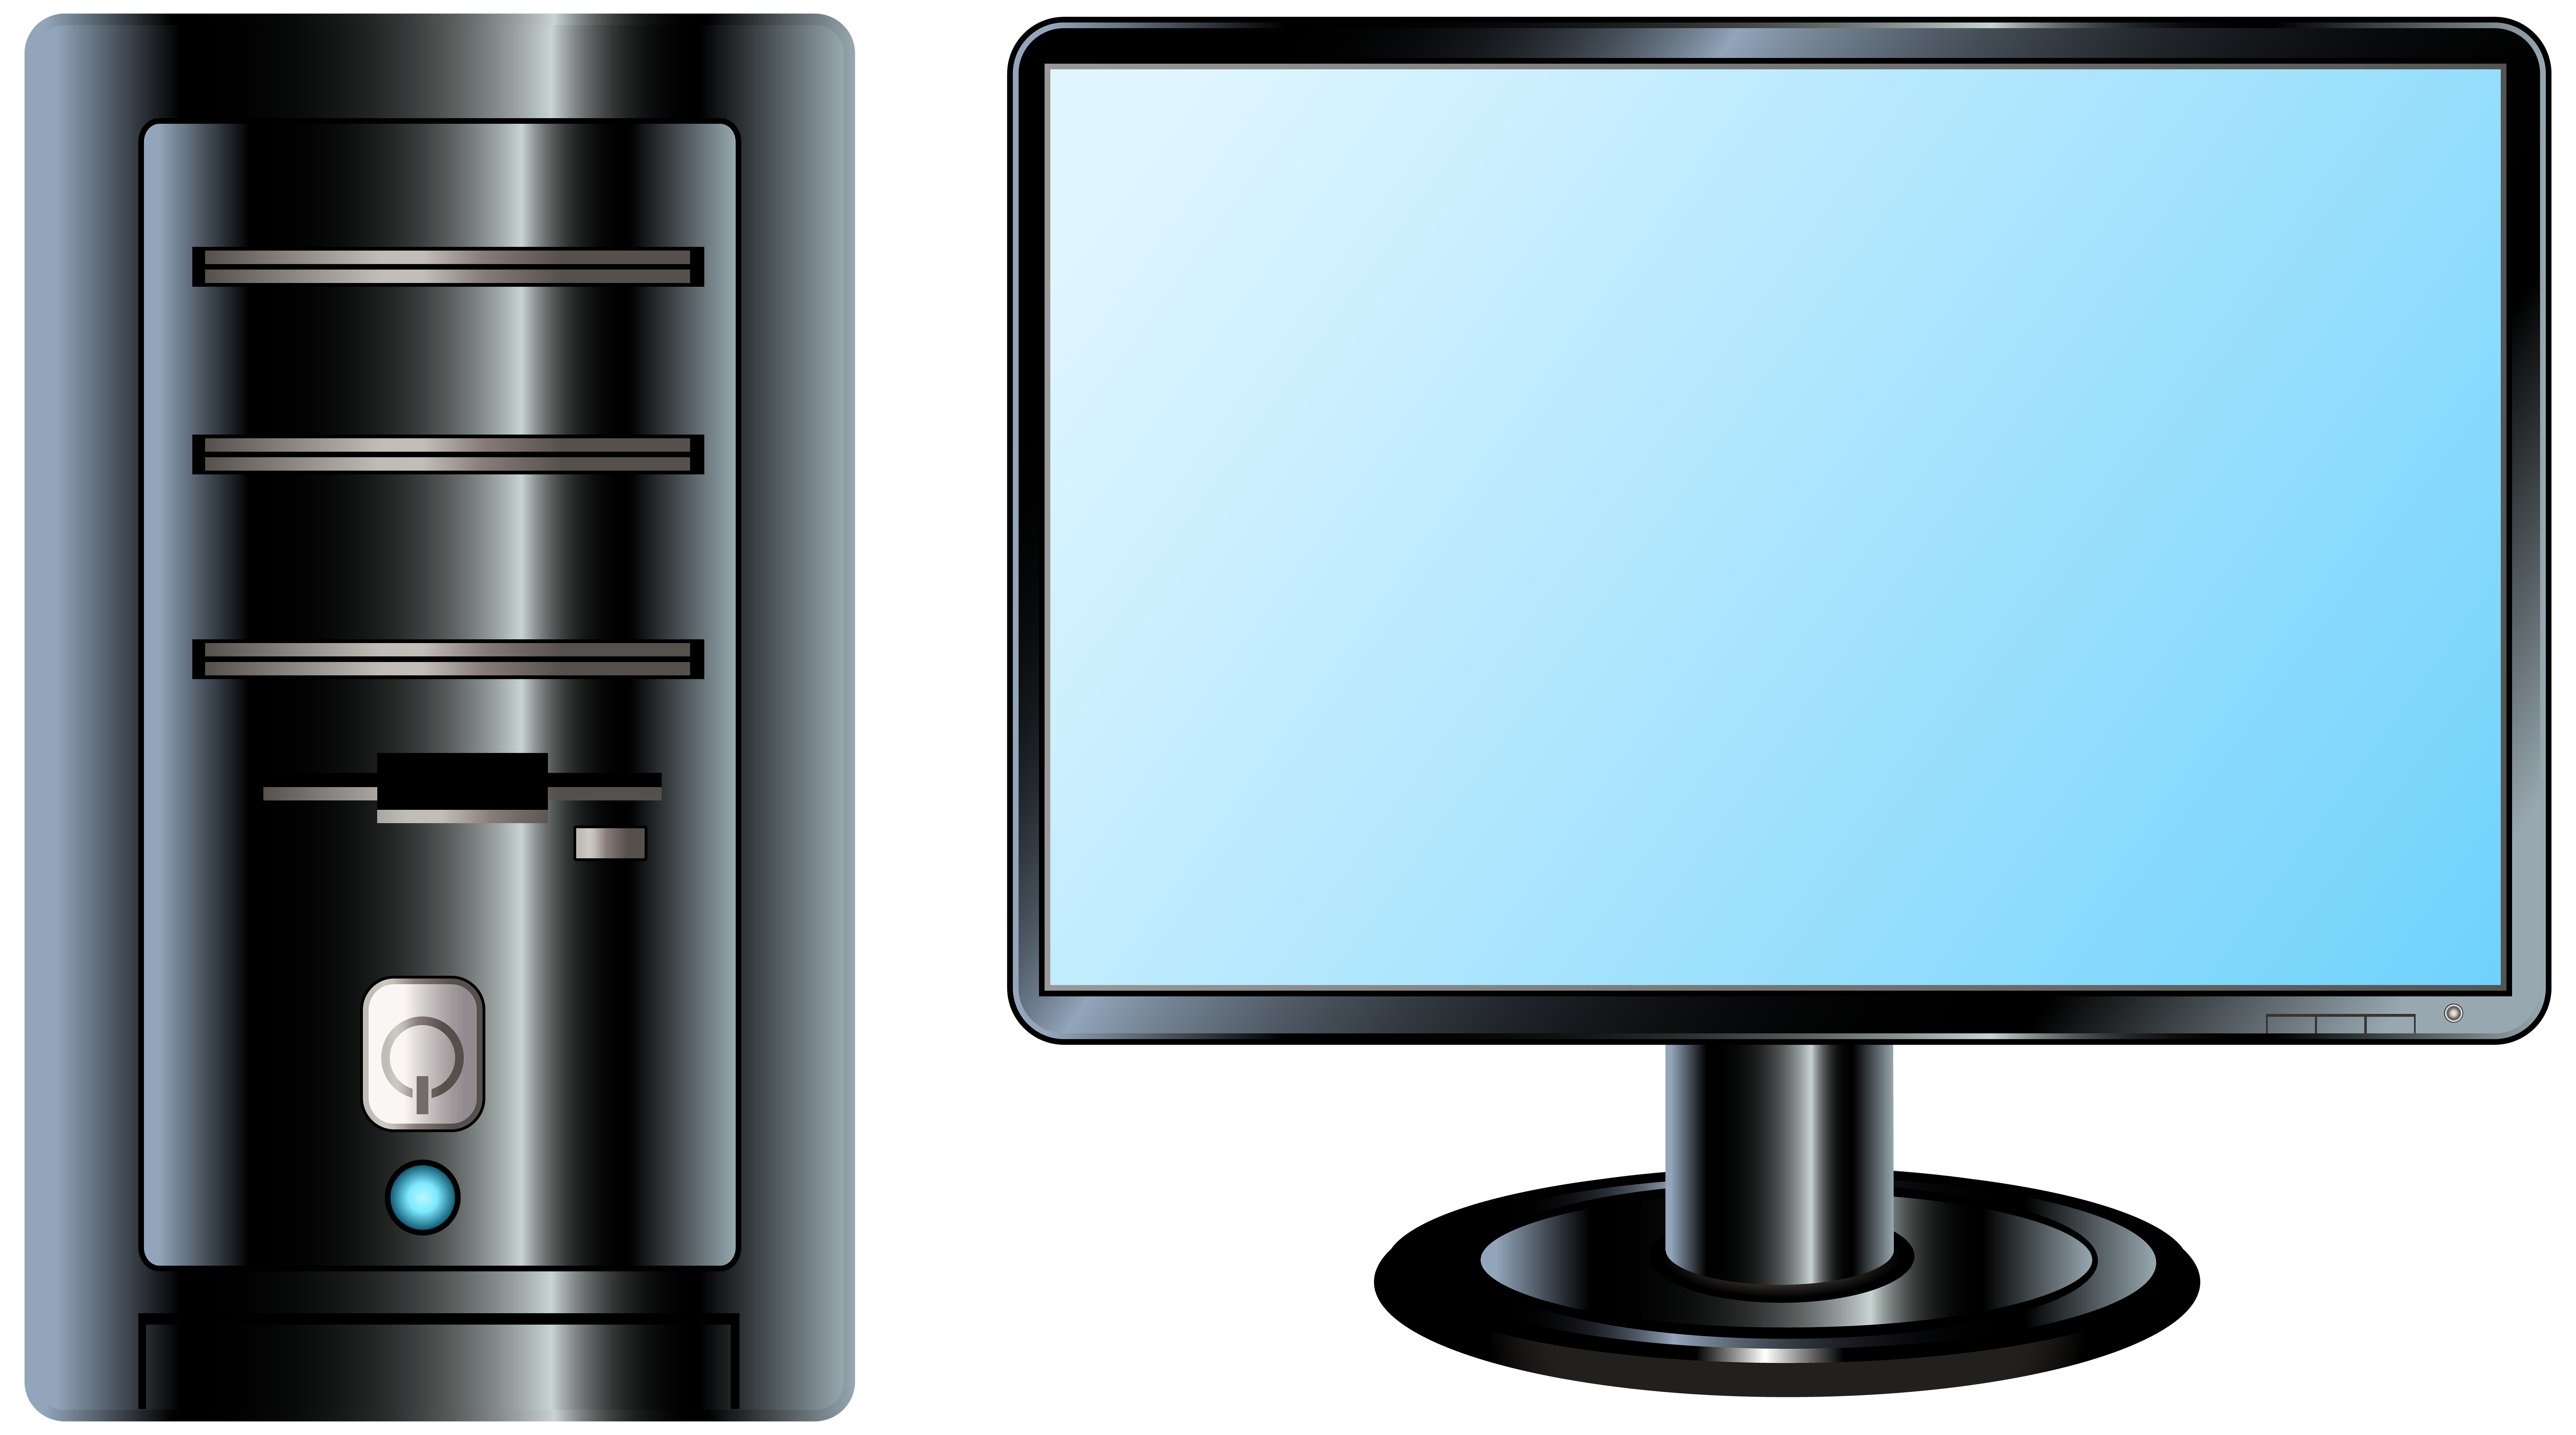 computer monitor clipart png